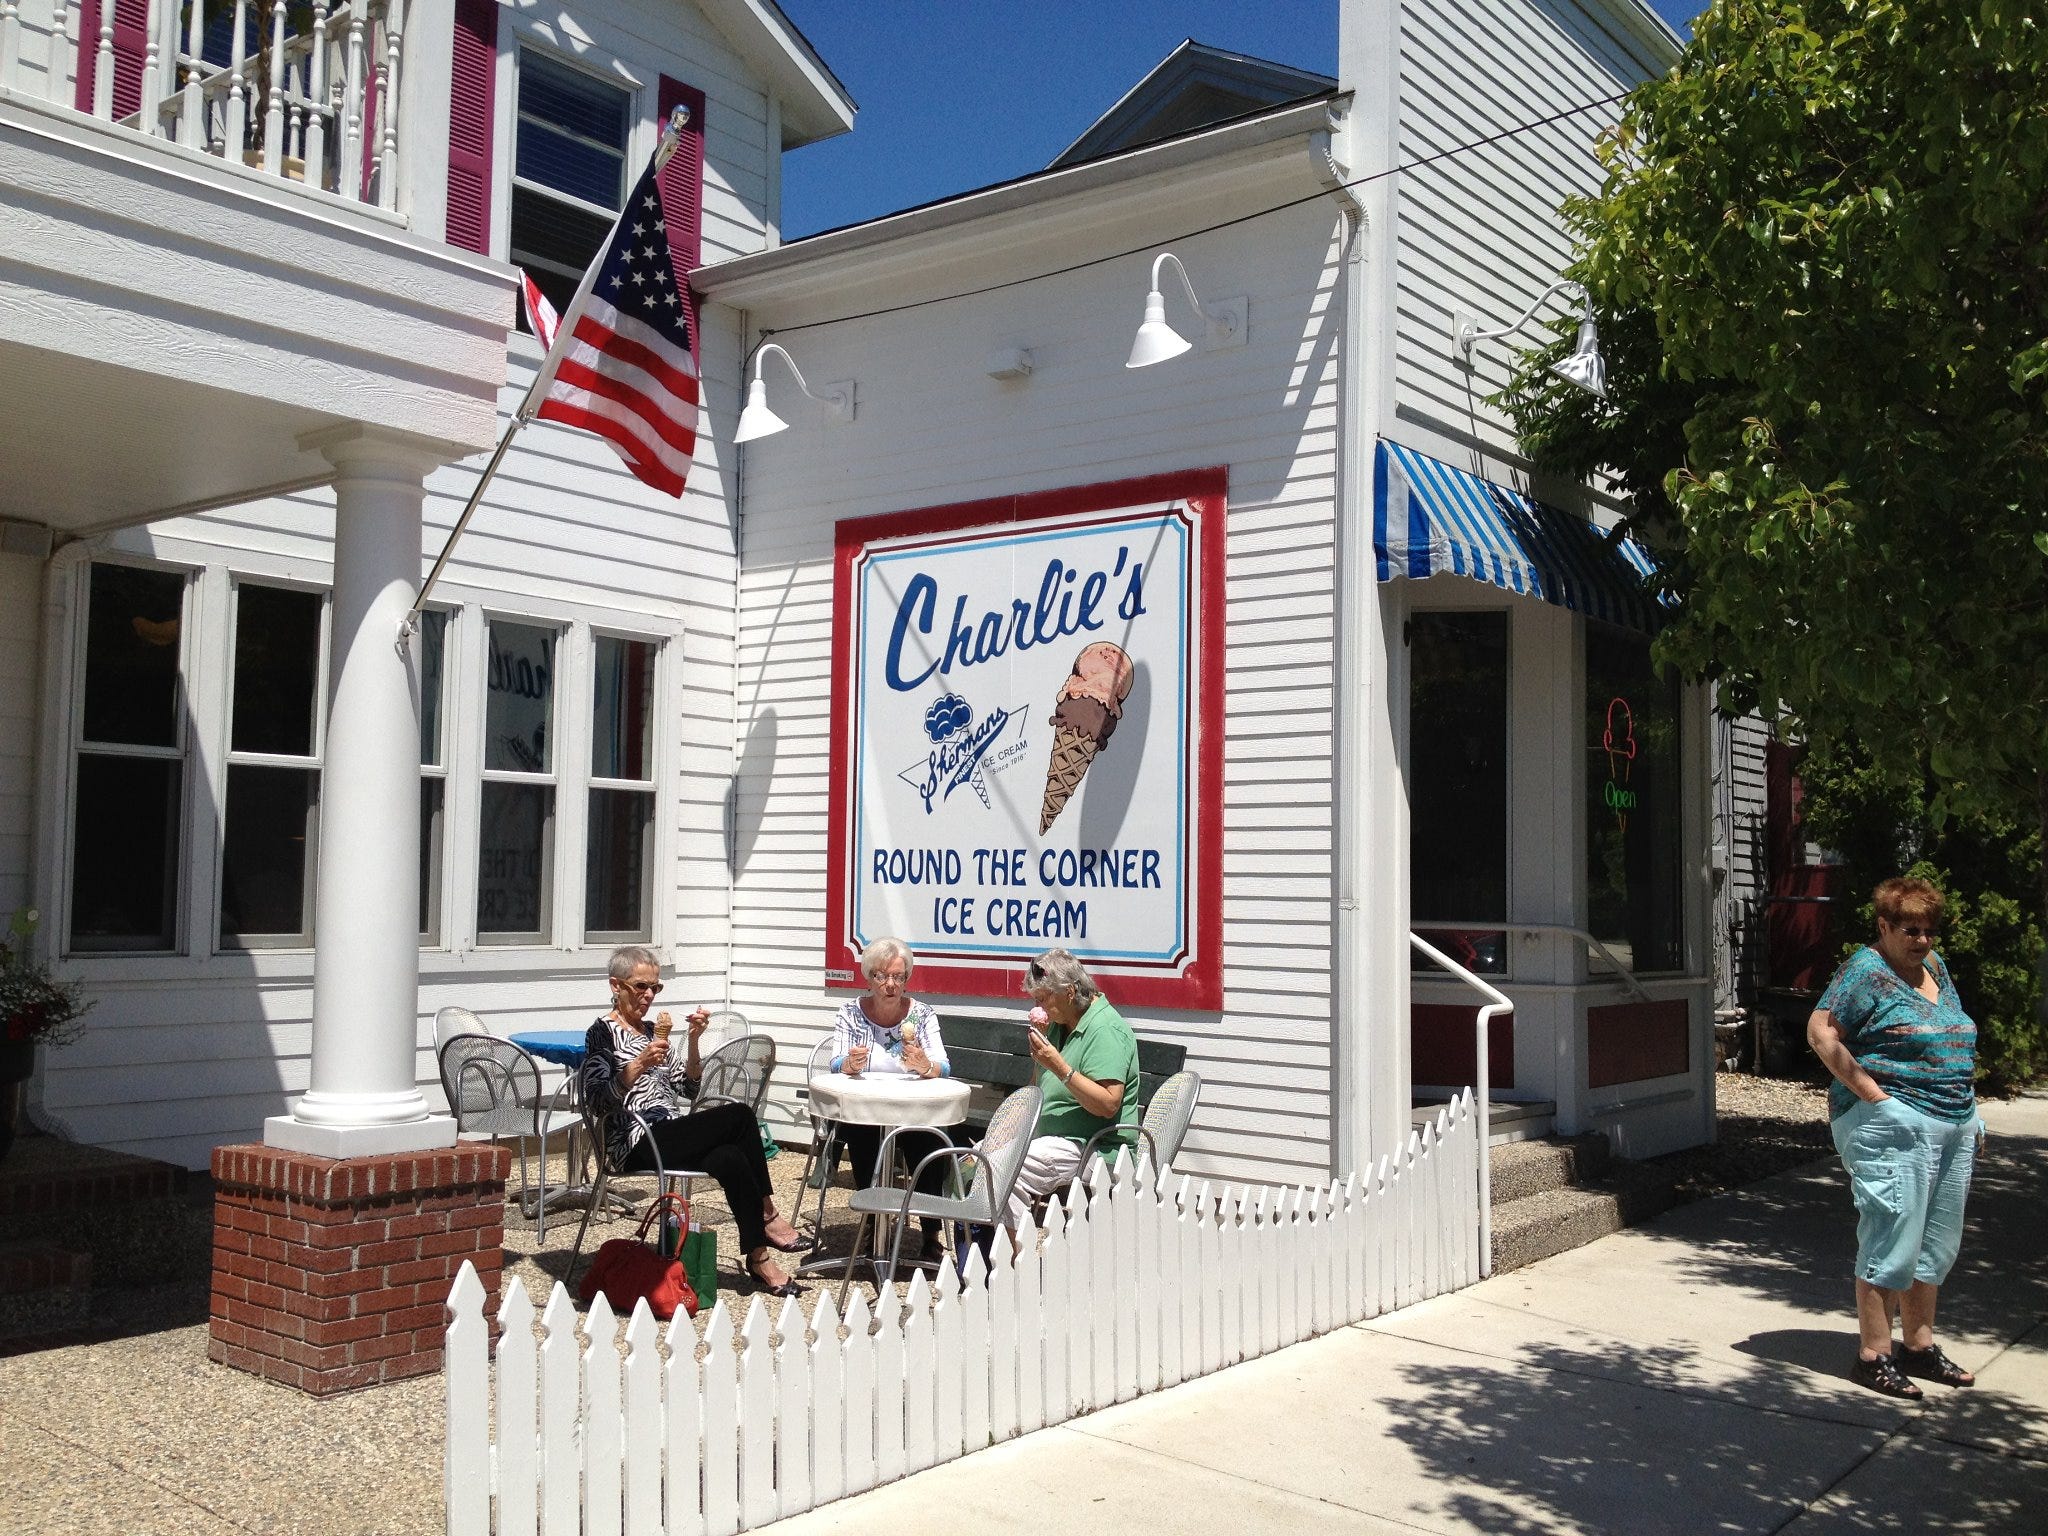 In the U.S. Small Business Administration's recently released data on Paycheck Protection Program recipients, the seasonal 'Round the Corner Ice Cream shop in Saugatuck is listed as receiving between $2 and $5 million, despite only having 10 employees. Owner Lisa Freeman says the shop got less than $20,000 and that the SBA has made "a grave error."